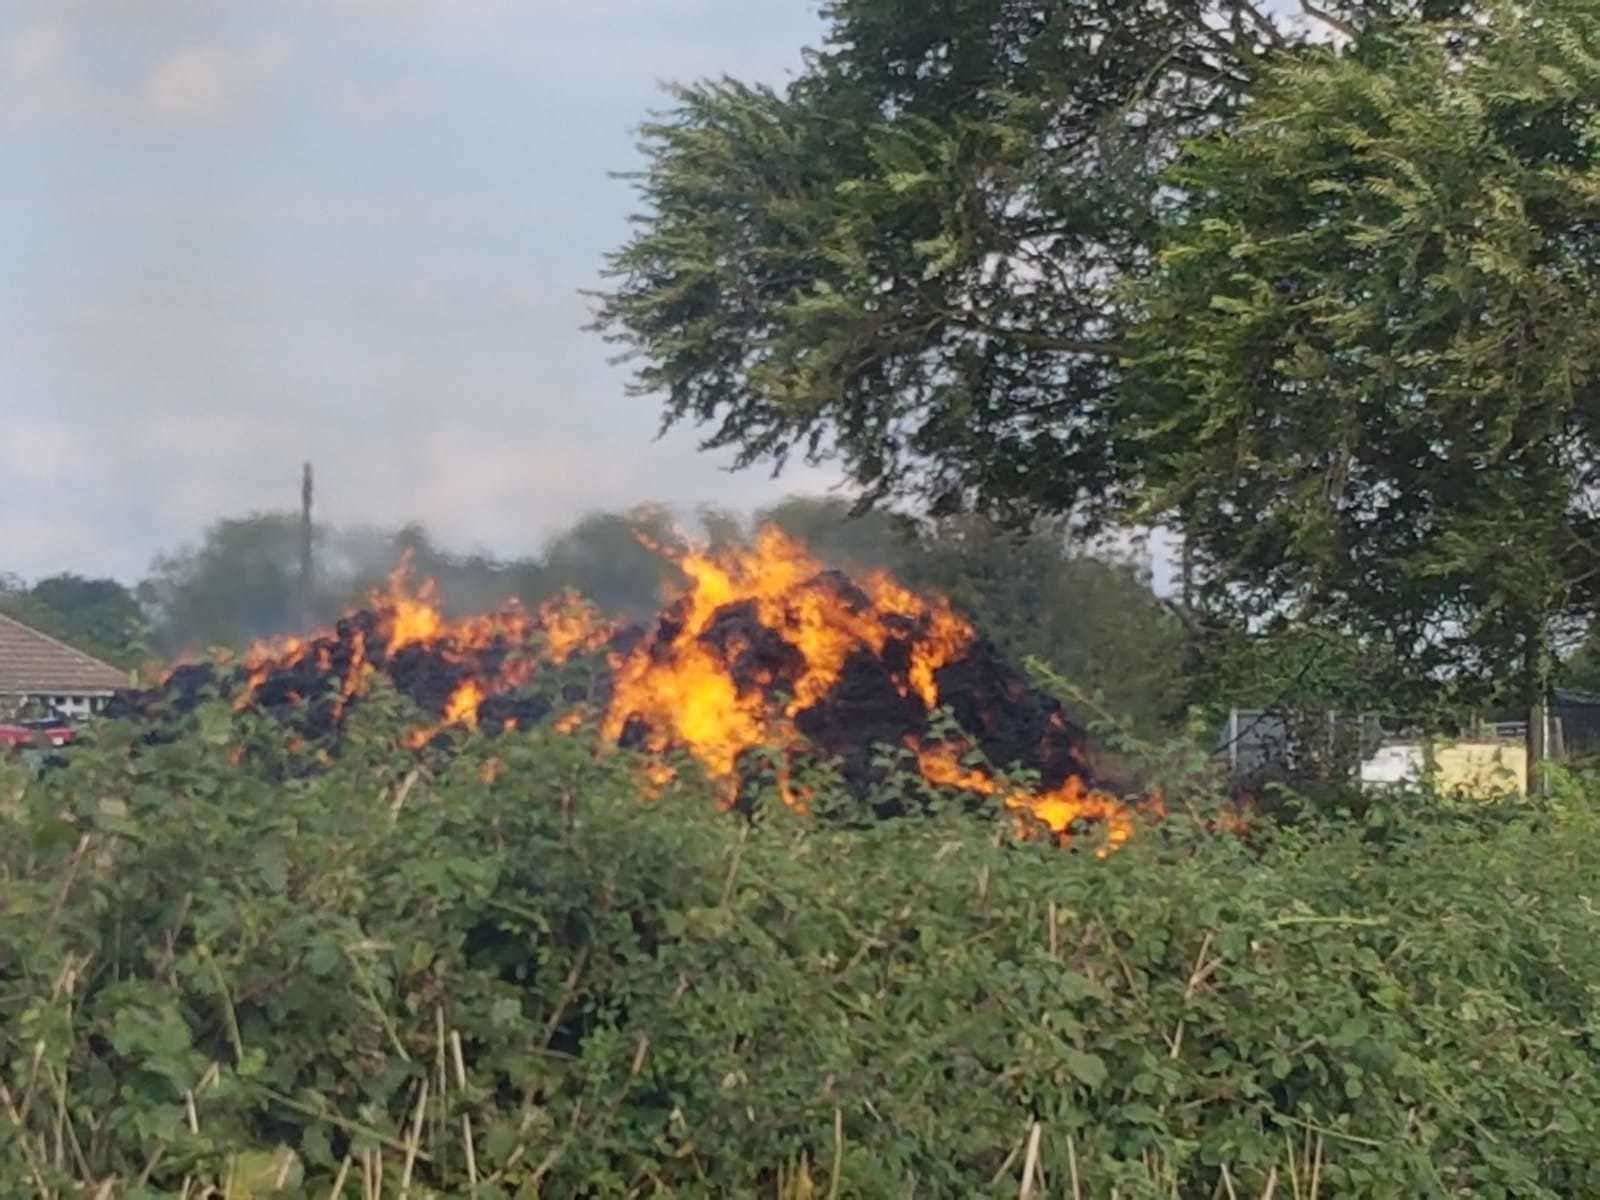 This picture, taken yesterday, shows about 100 hay bales ablaze next to the junction of the A251 and Shottenden Road